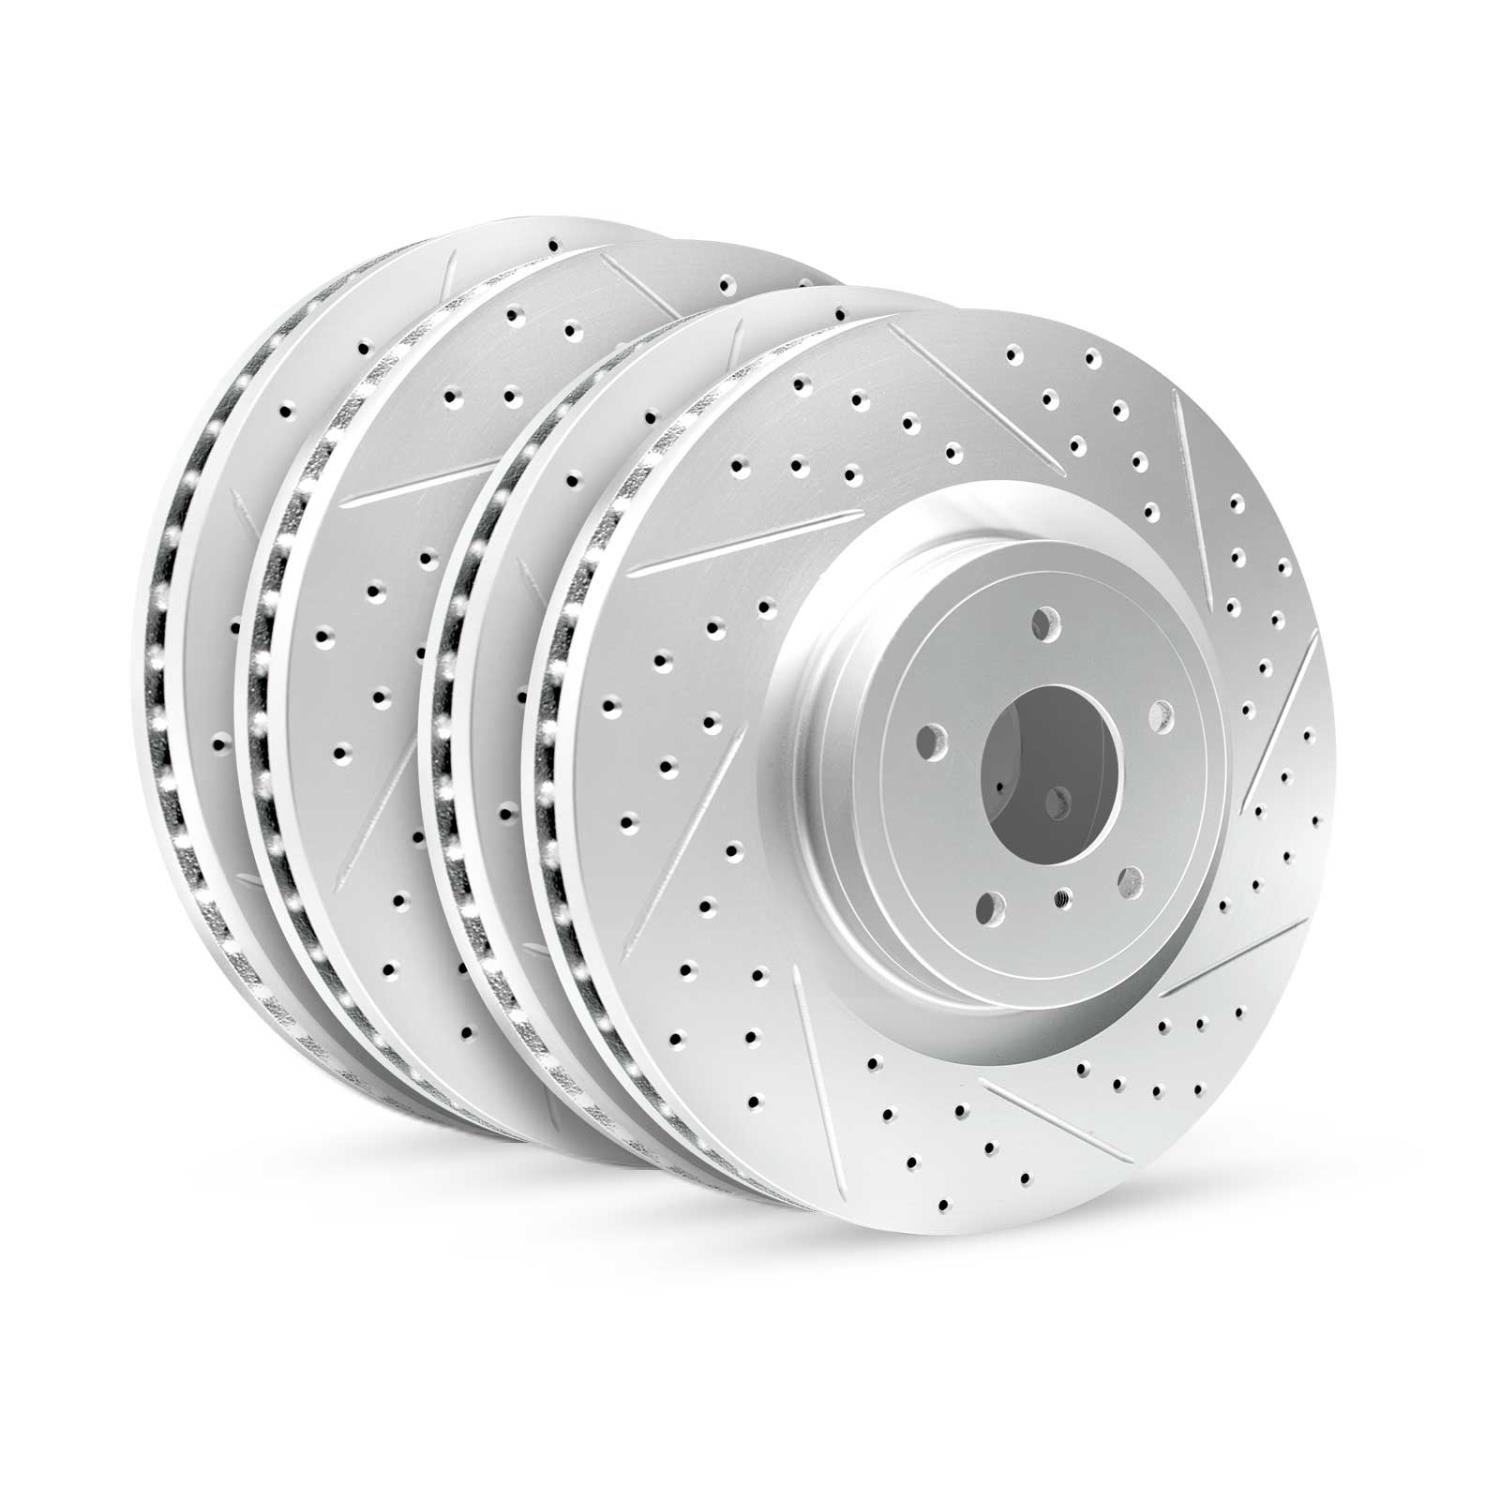 GEO-Carbon Drilled/Slotted Rotors, 2006-2013 Ford/Mazda,